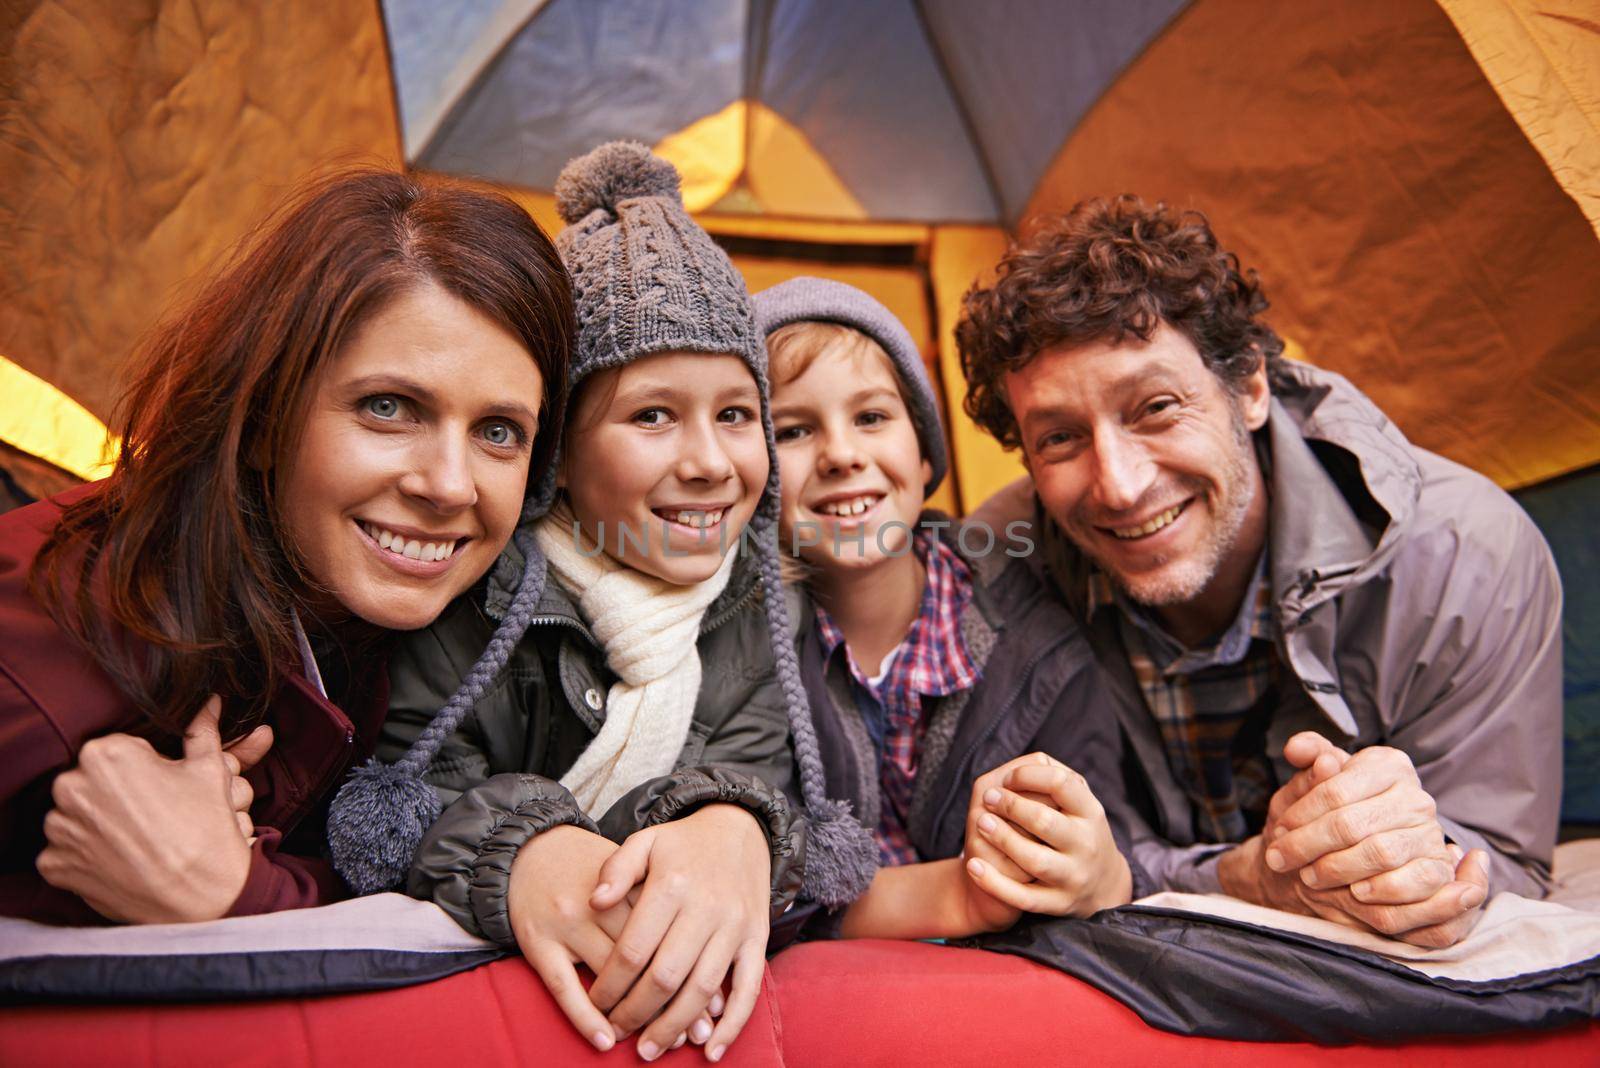 Family camping is family bonding. Portrait of smiling family of four relaxing in tent on a camping holiday